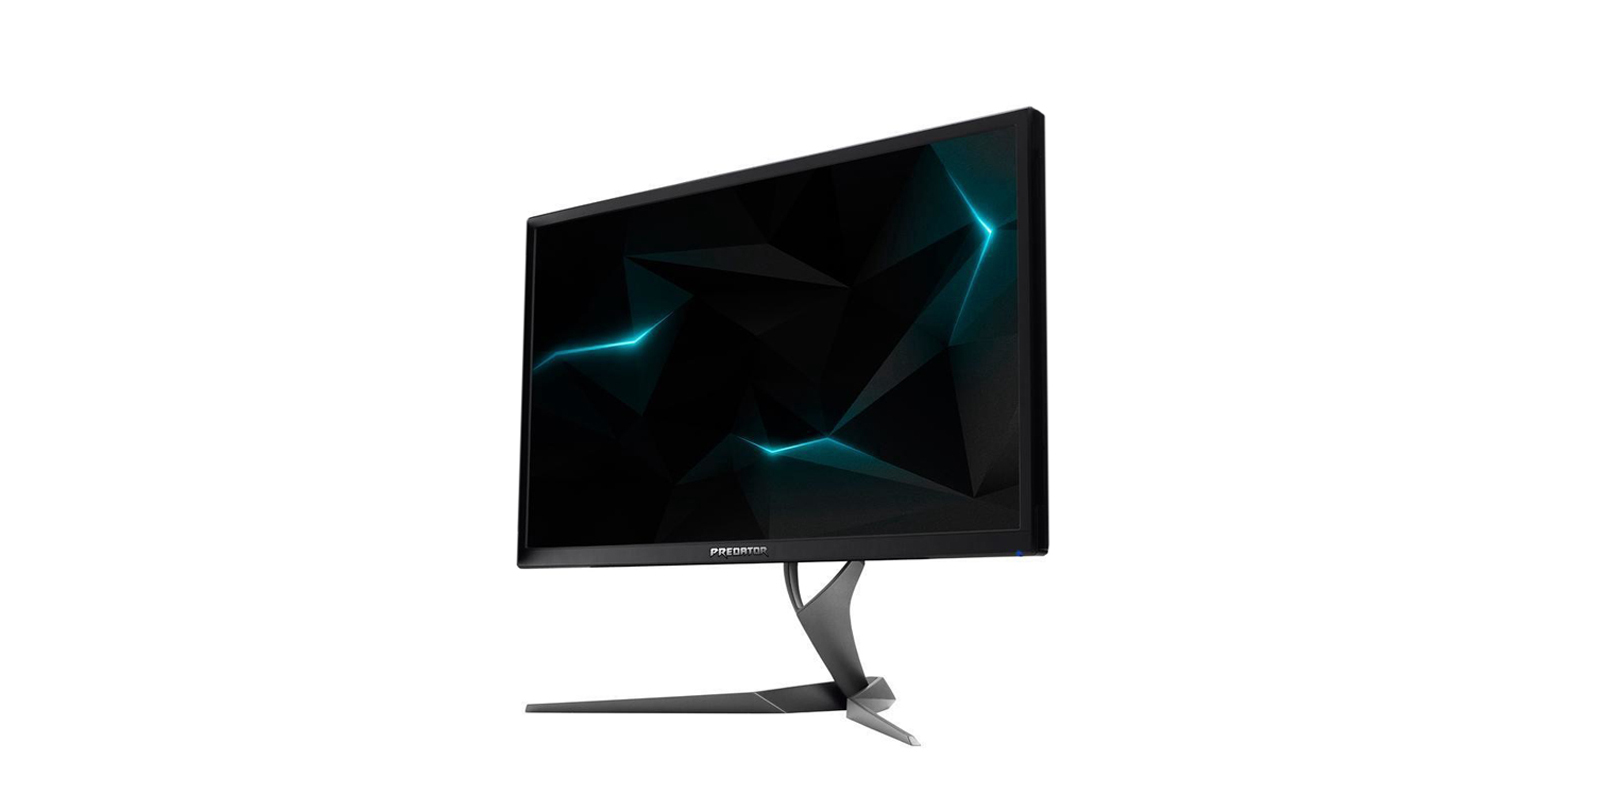 NVIDIA Details New Acer 32-inch Cranking 1440p at 240Hz Refresh Rate in  XB323U GX